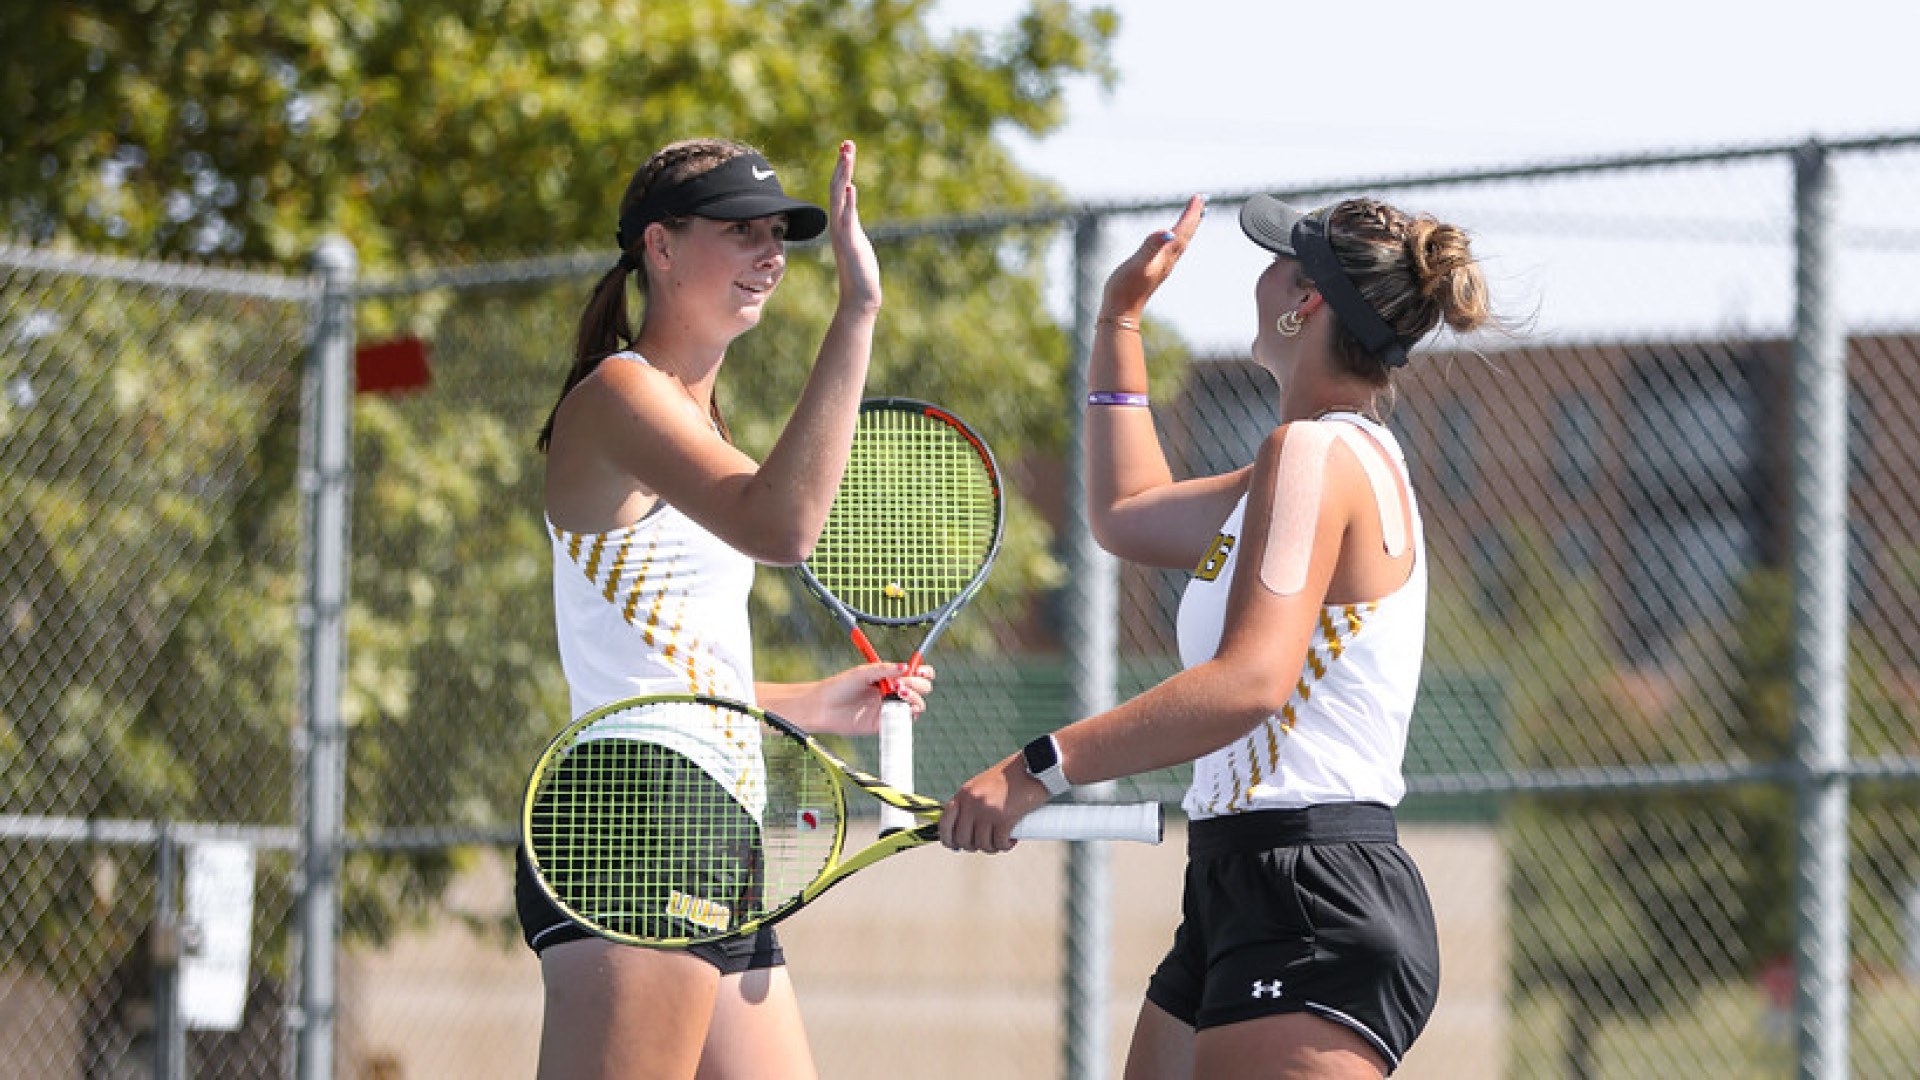 Kayla Gibbs and Jameson Gregory beat their Marian opponents 8-0 in the No. 3 doubles match on Wednesday